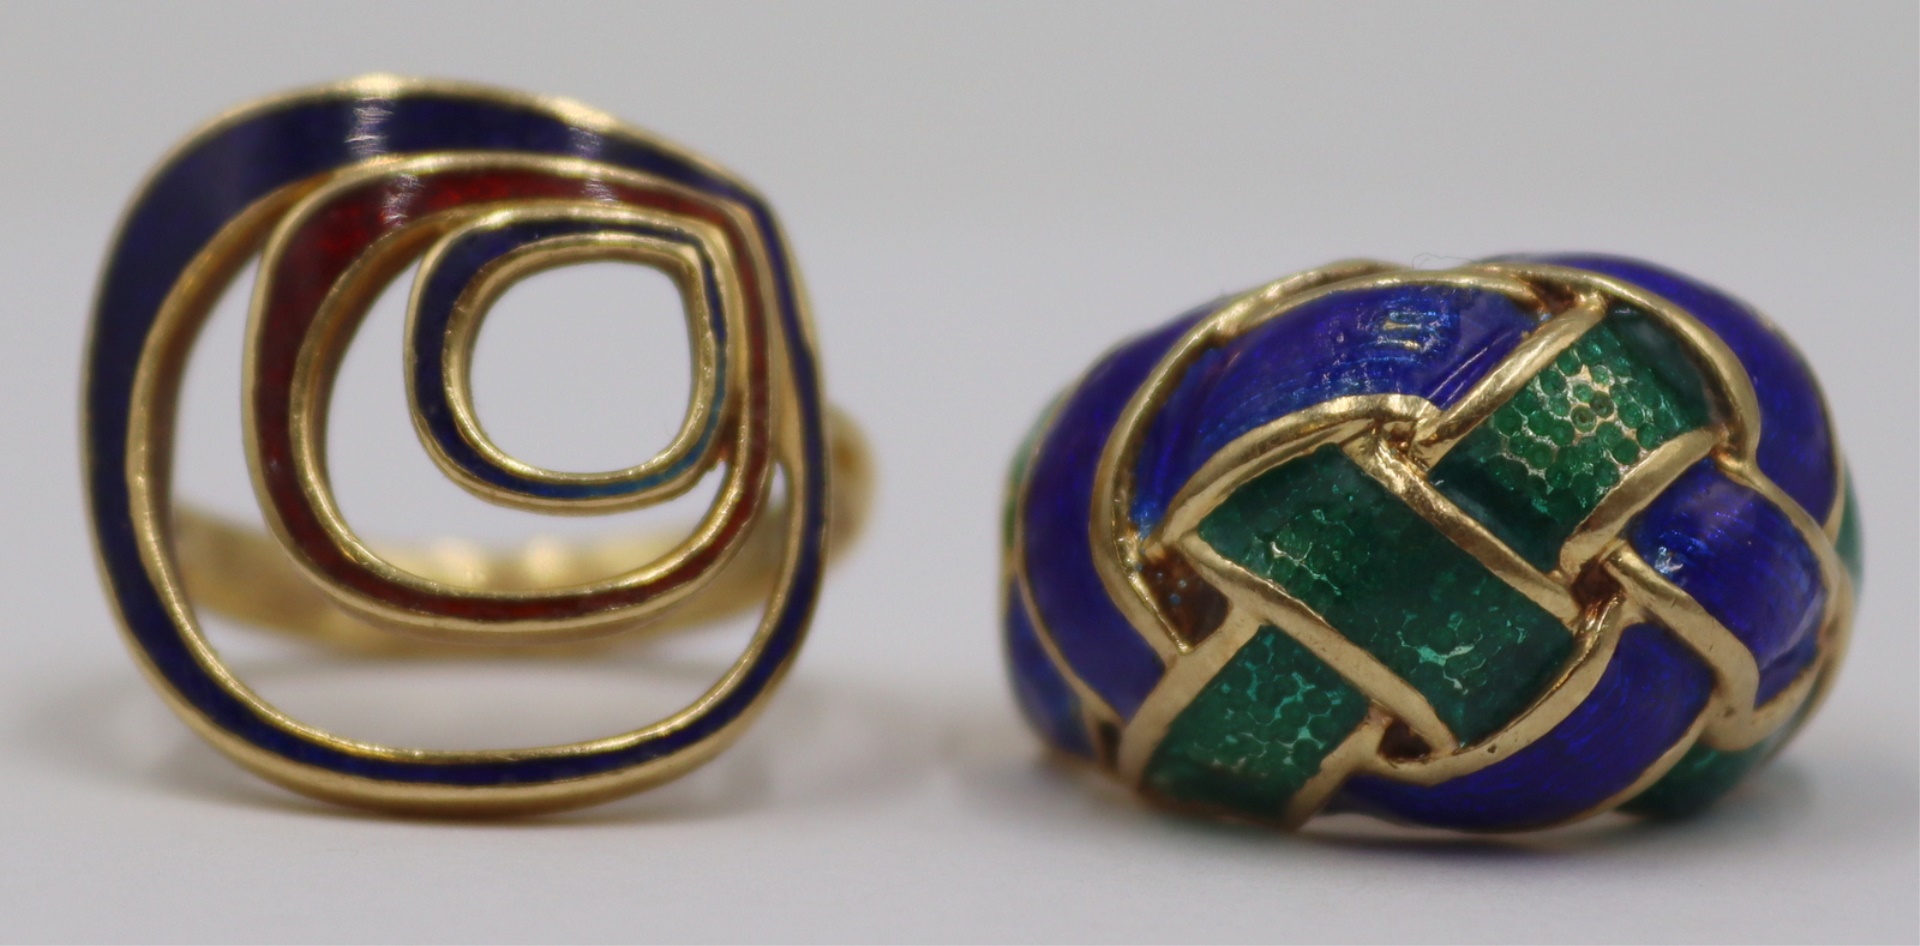 JEWELRY. 18KT &14KT GOLD AND ENAMEL